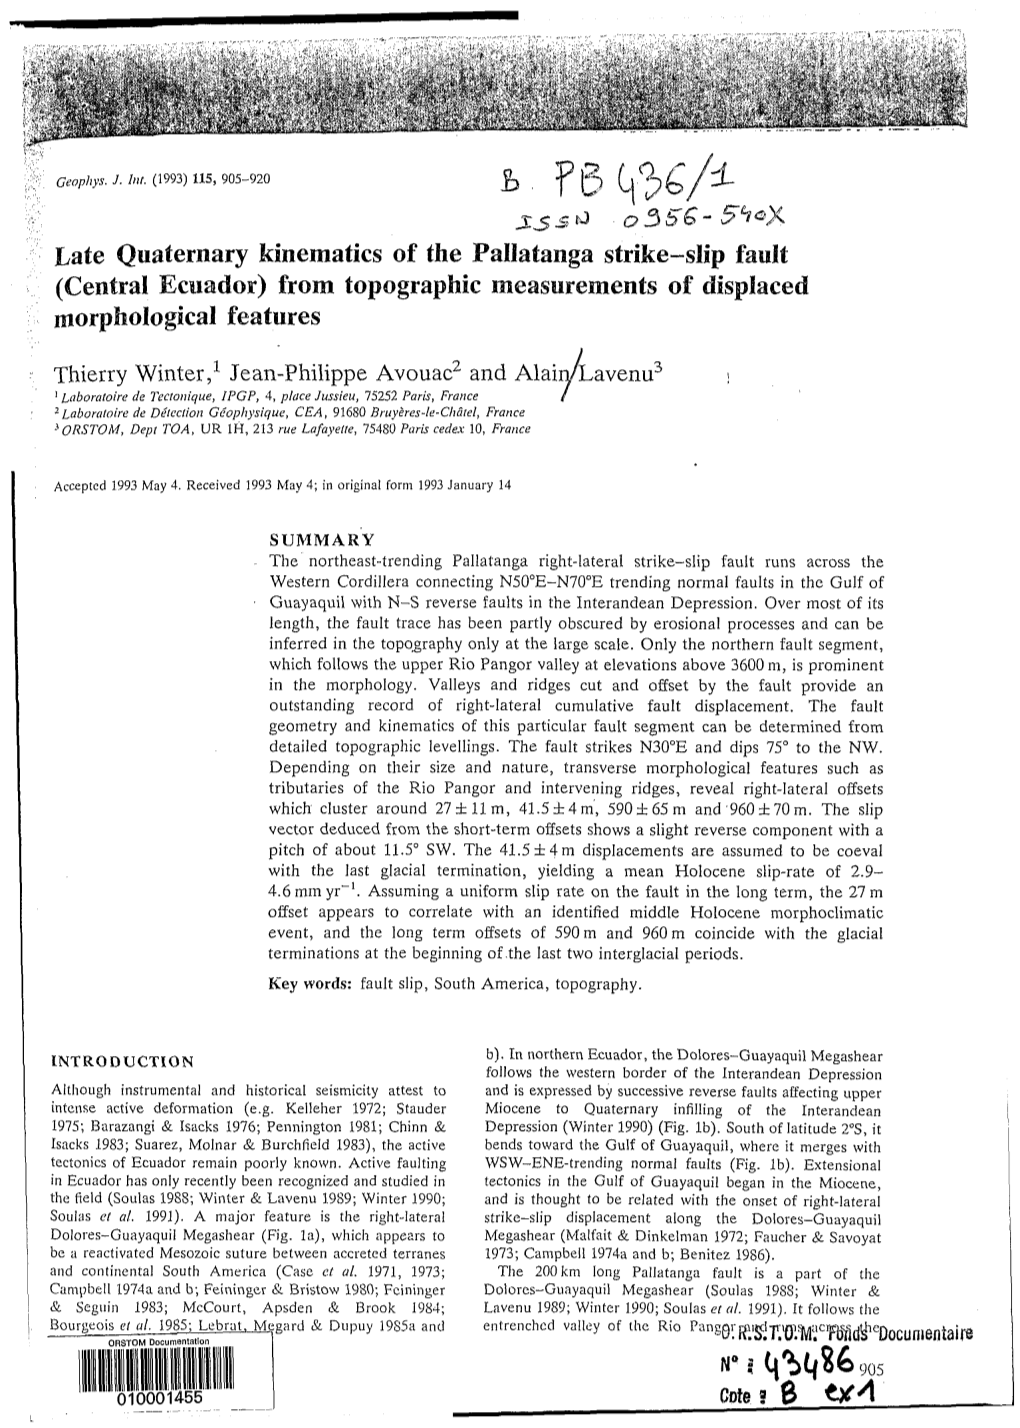 Late Quaternary Kinematics of the Pallatanga Strike-Slip Fault Cnador) from Topographic Measurements of Displaced Morphological Features